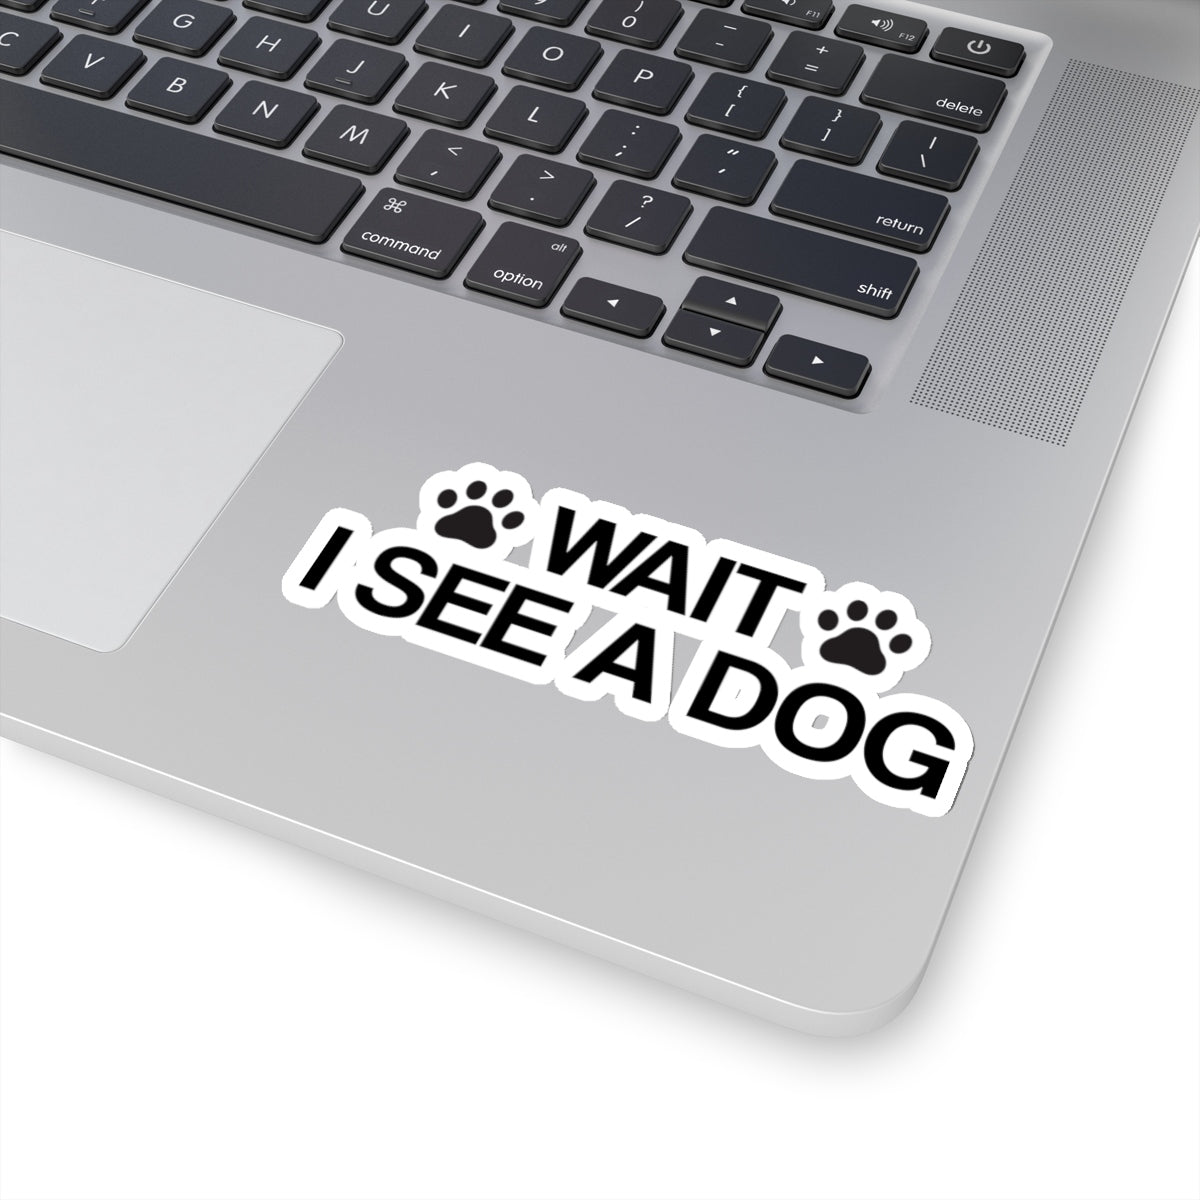 Wait I See A Dog Sticker, Paws Hold On Funny Animal Laptop Decal Vinyl Cute Waterbottle Tumbler Car Bumper Aesthetic Wall Mural Starcove Fashion